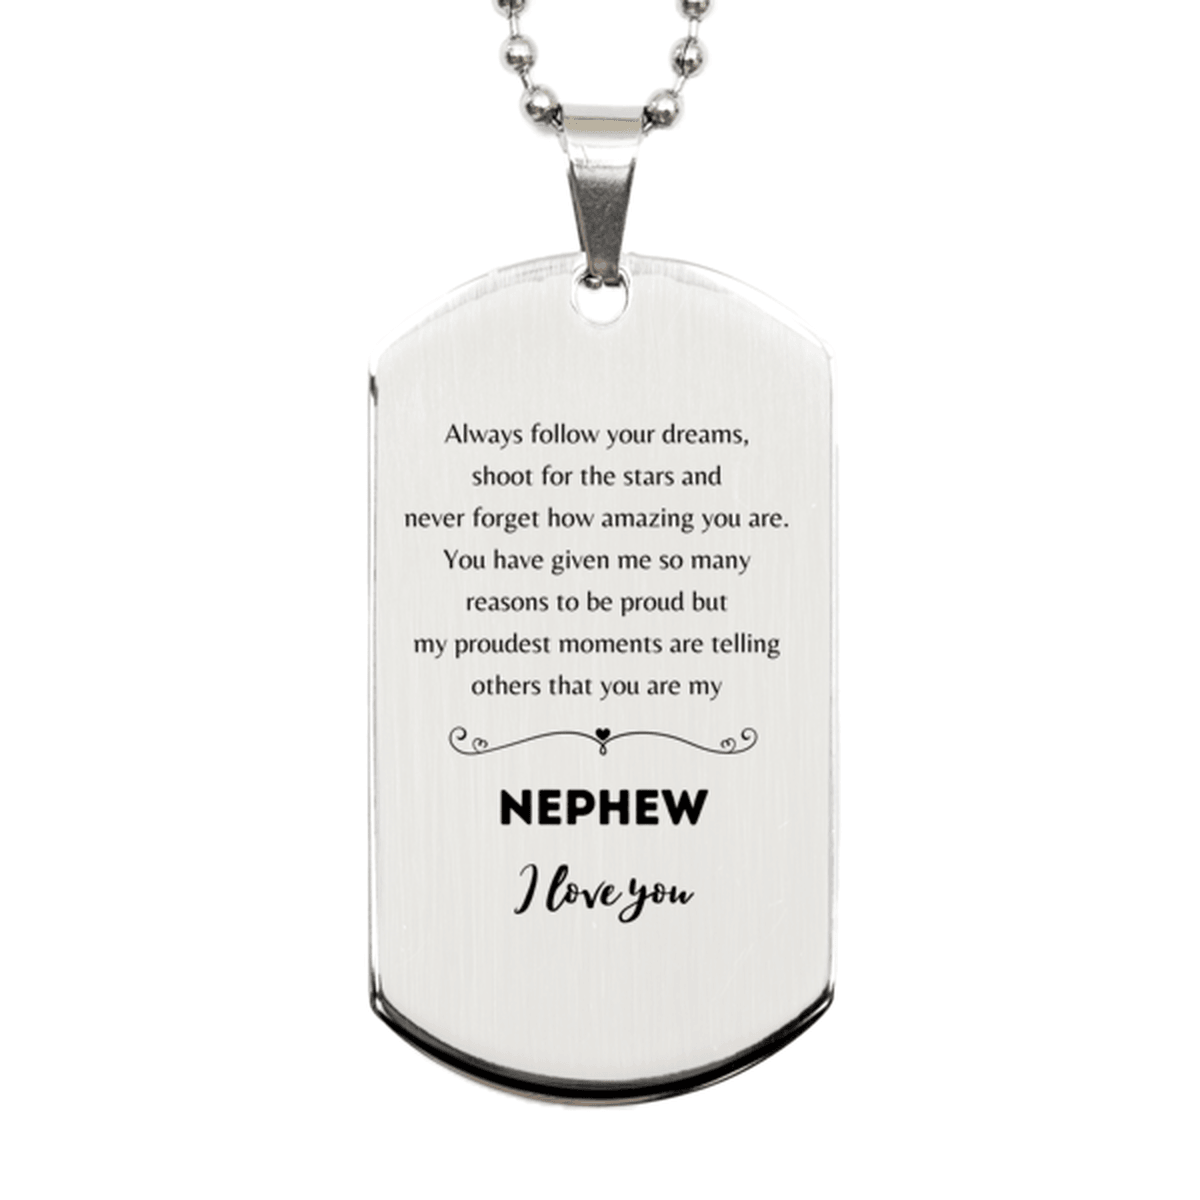 Nephew Silver Dog Tag Engraved Necklace - Always Follow your Dreams - Birthday, Christmas Holiday Jewelry Gift - Mallard Moon Gift Shop